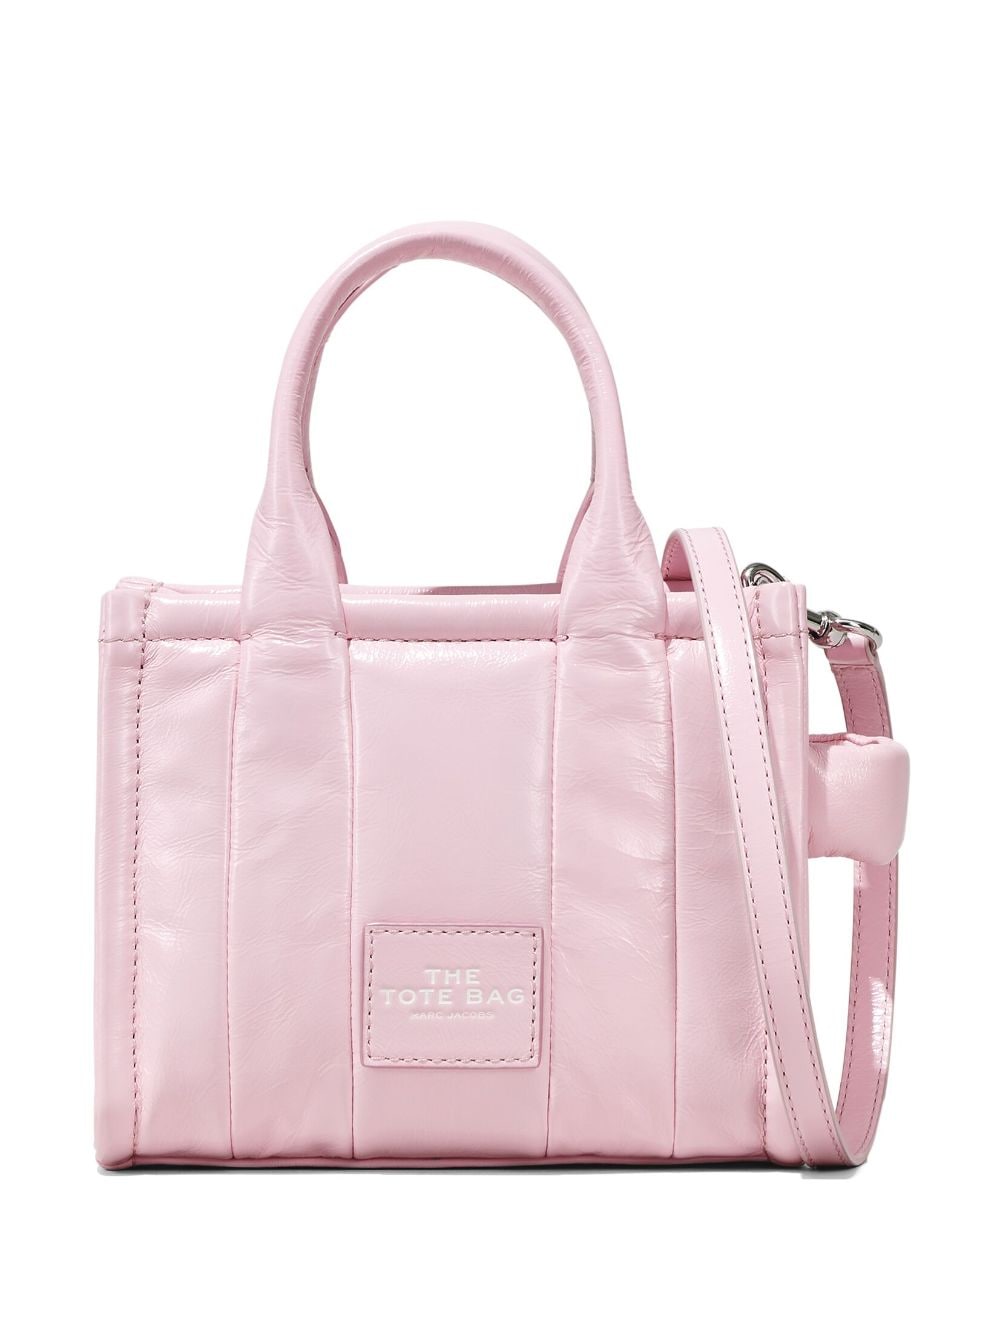 Marc Jacobs Mini The Shiny Crinkle Tote Handtasche - Rosa von Marc Jacobs